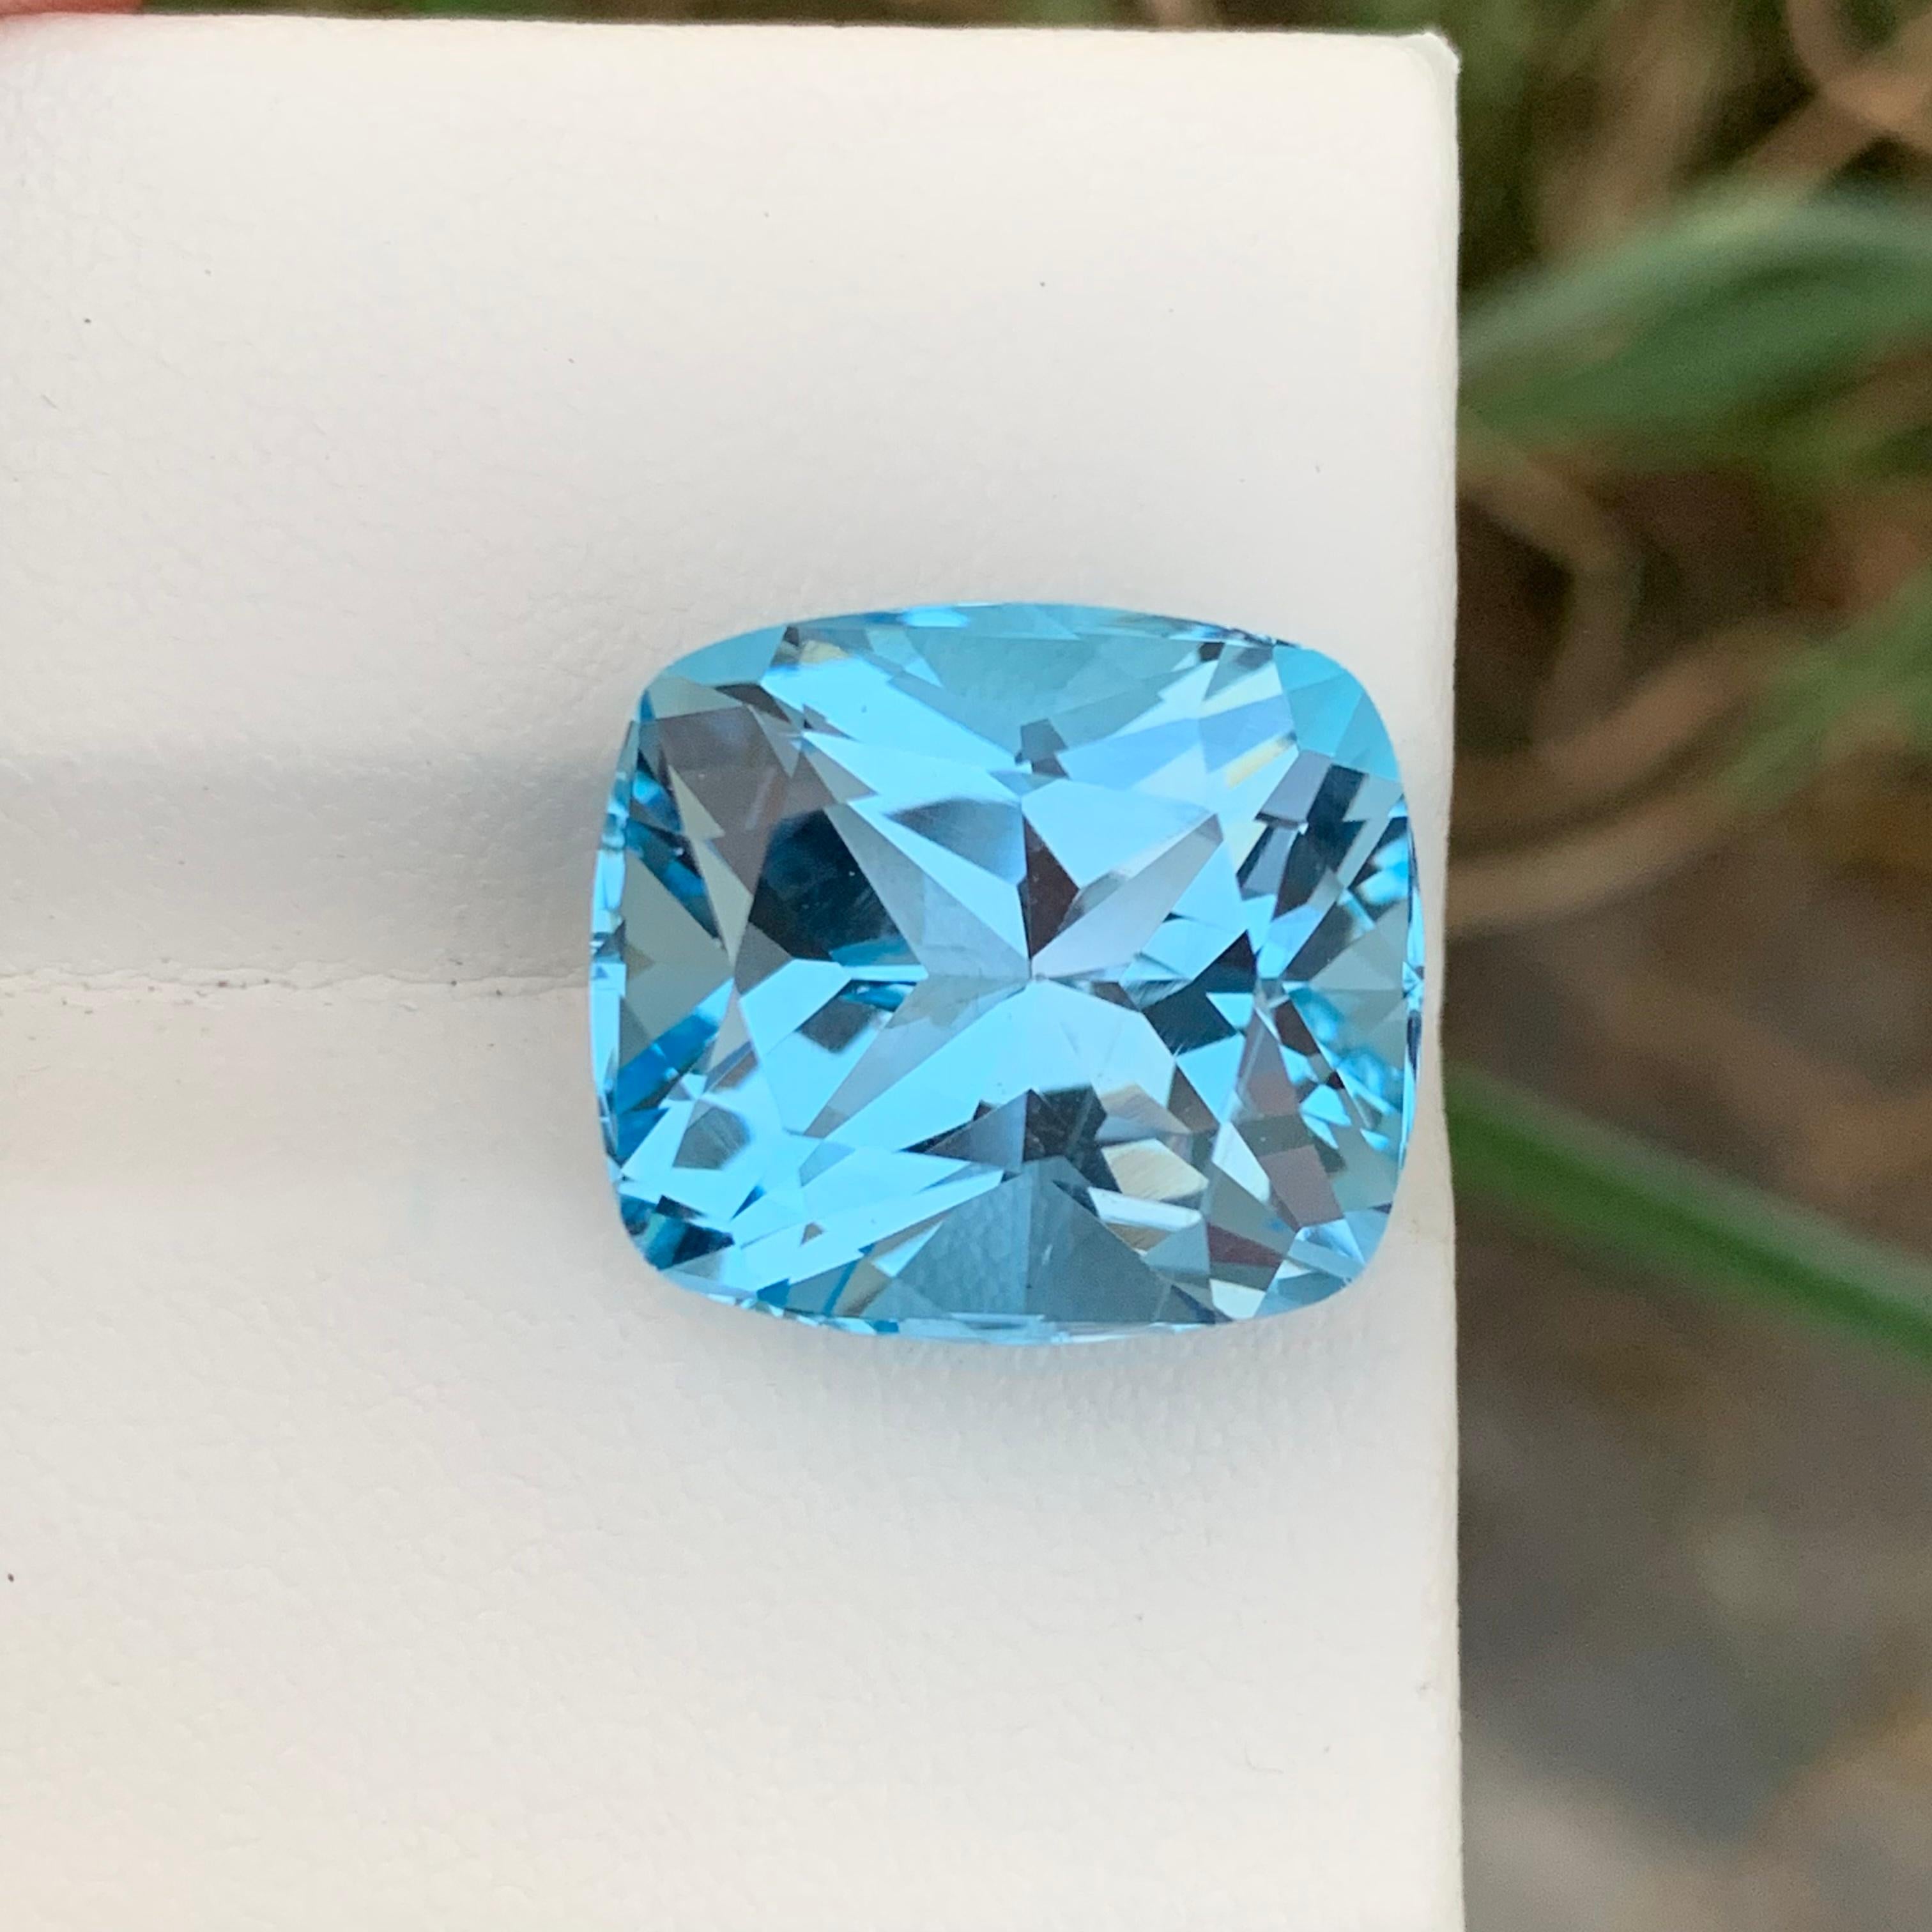 Gorgeous 22.25 Carats Faceted Sky Blue Topaz Cushion Cut Gem From Brazil Mine  For Sale 8